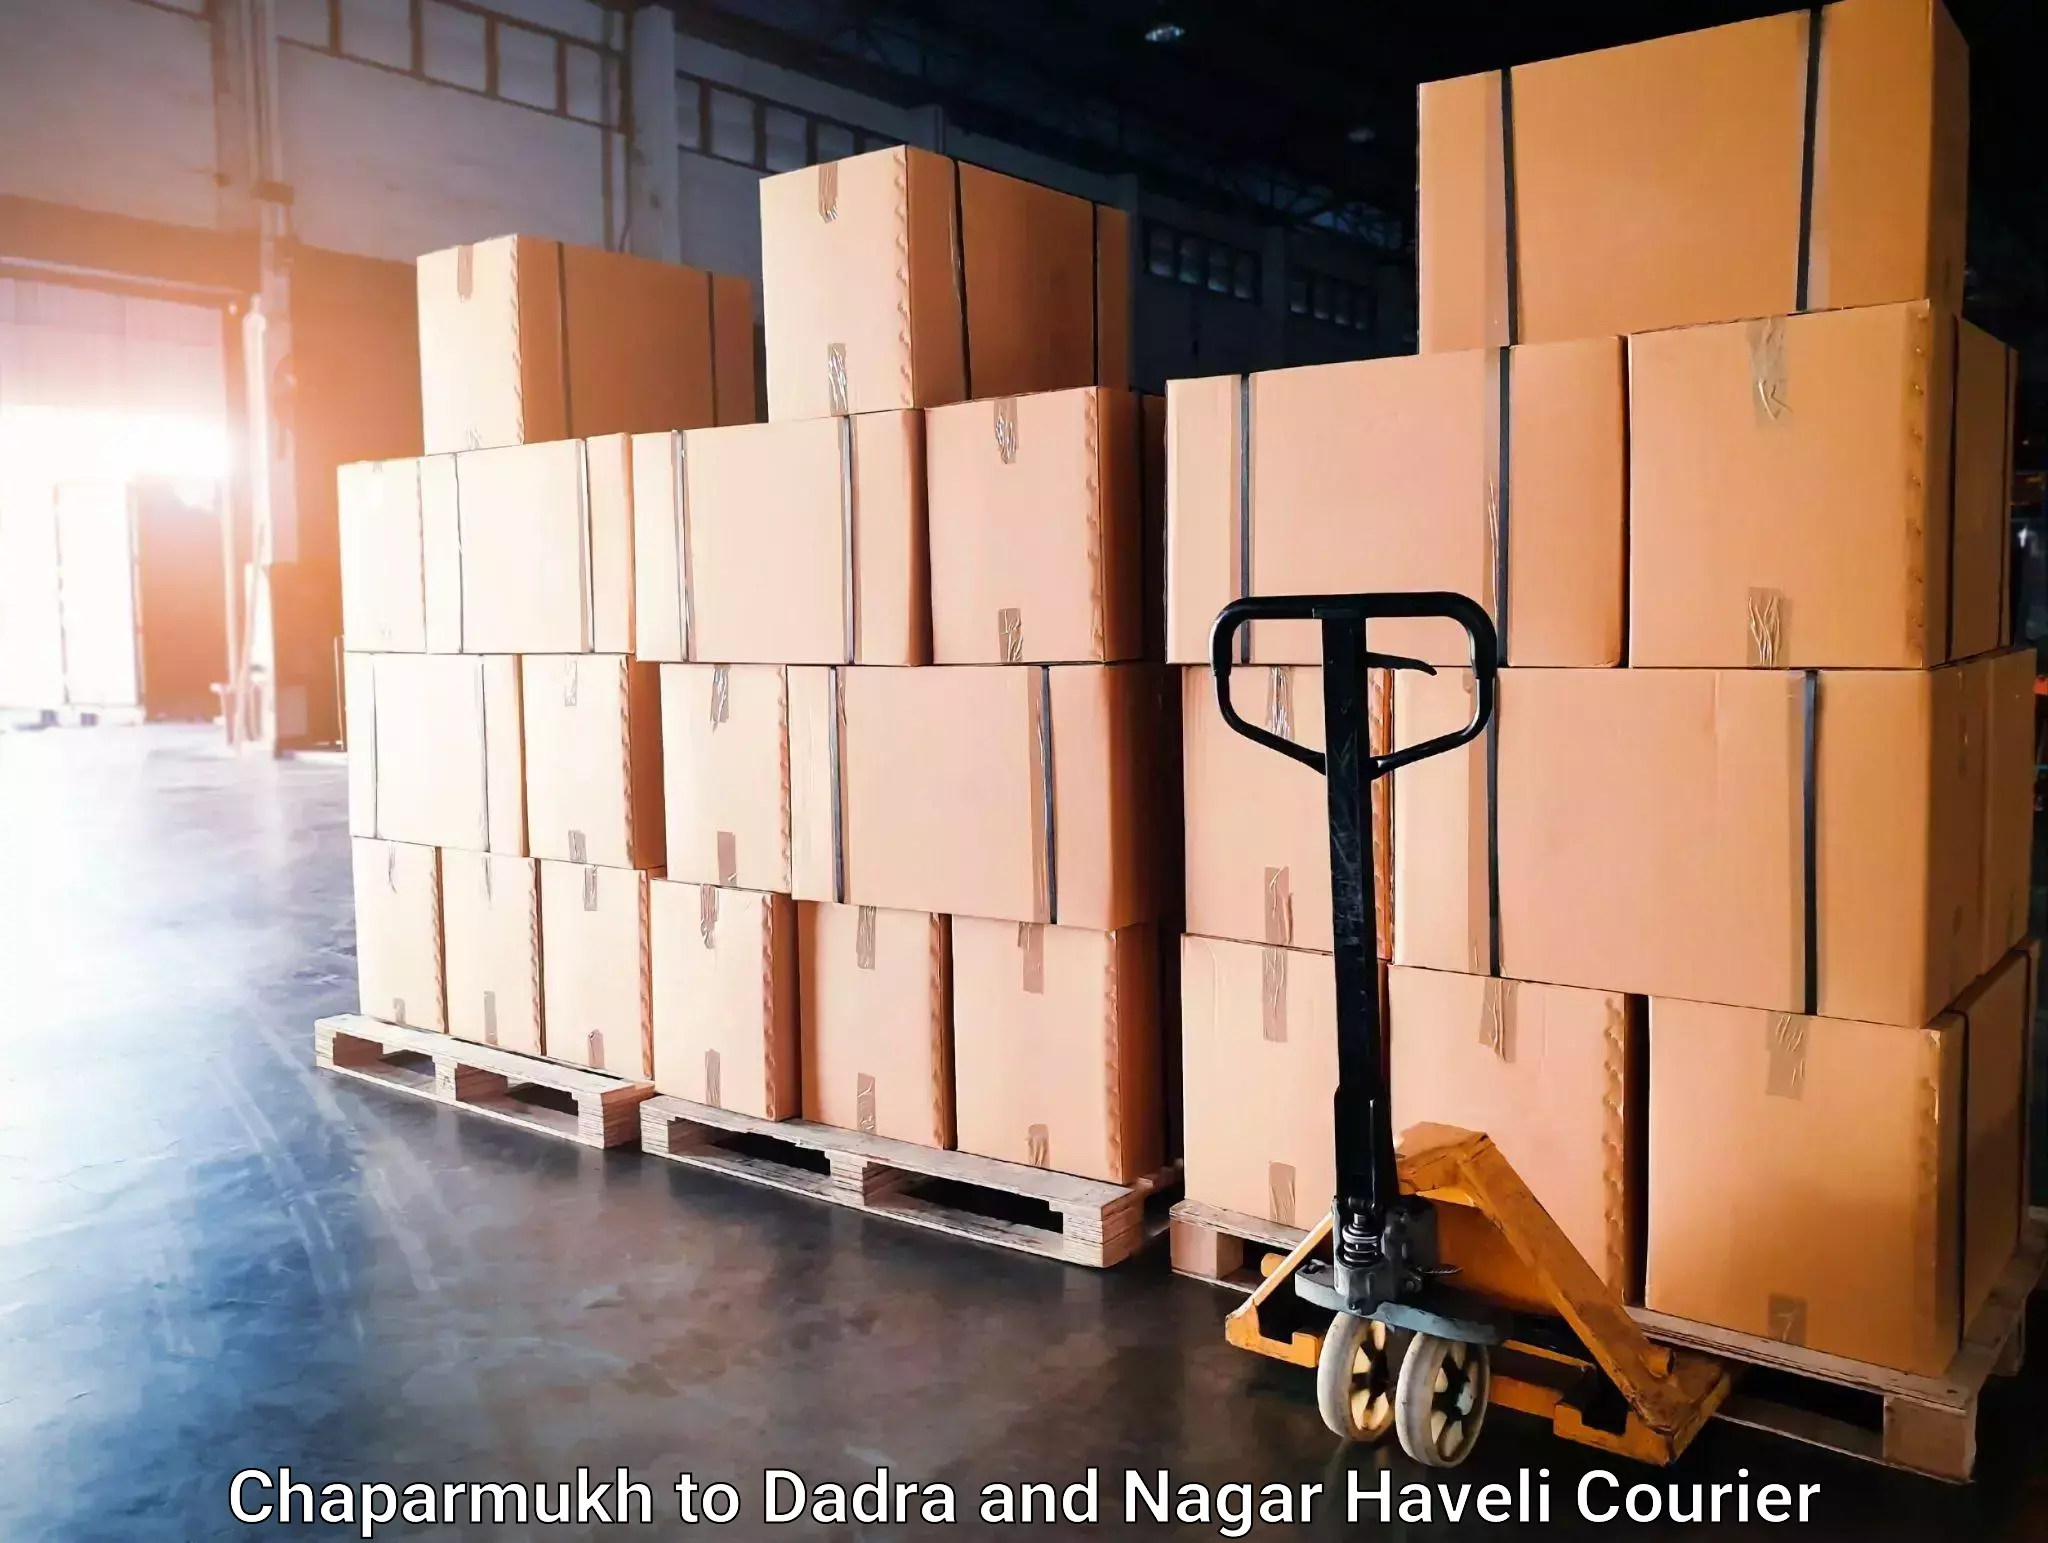 End-to-end delivery Chaparmukh to Dadra and Nagar Haveli